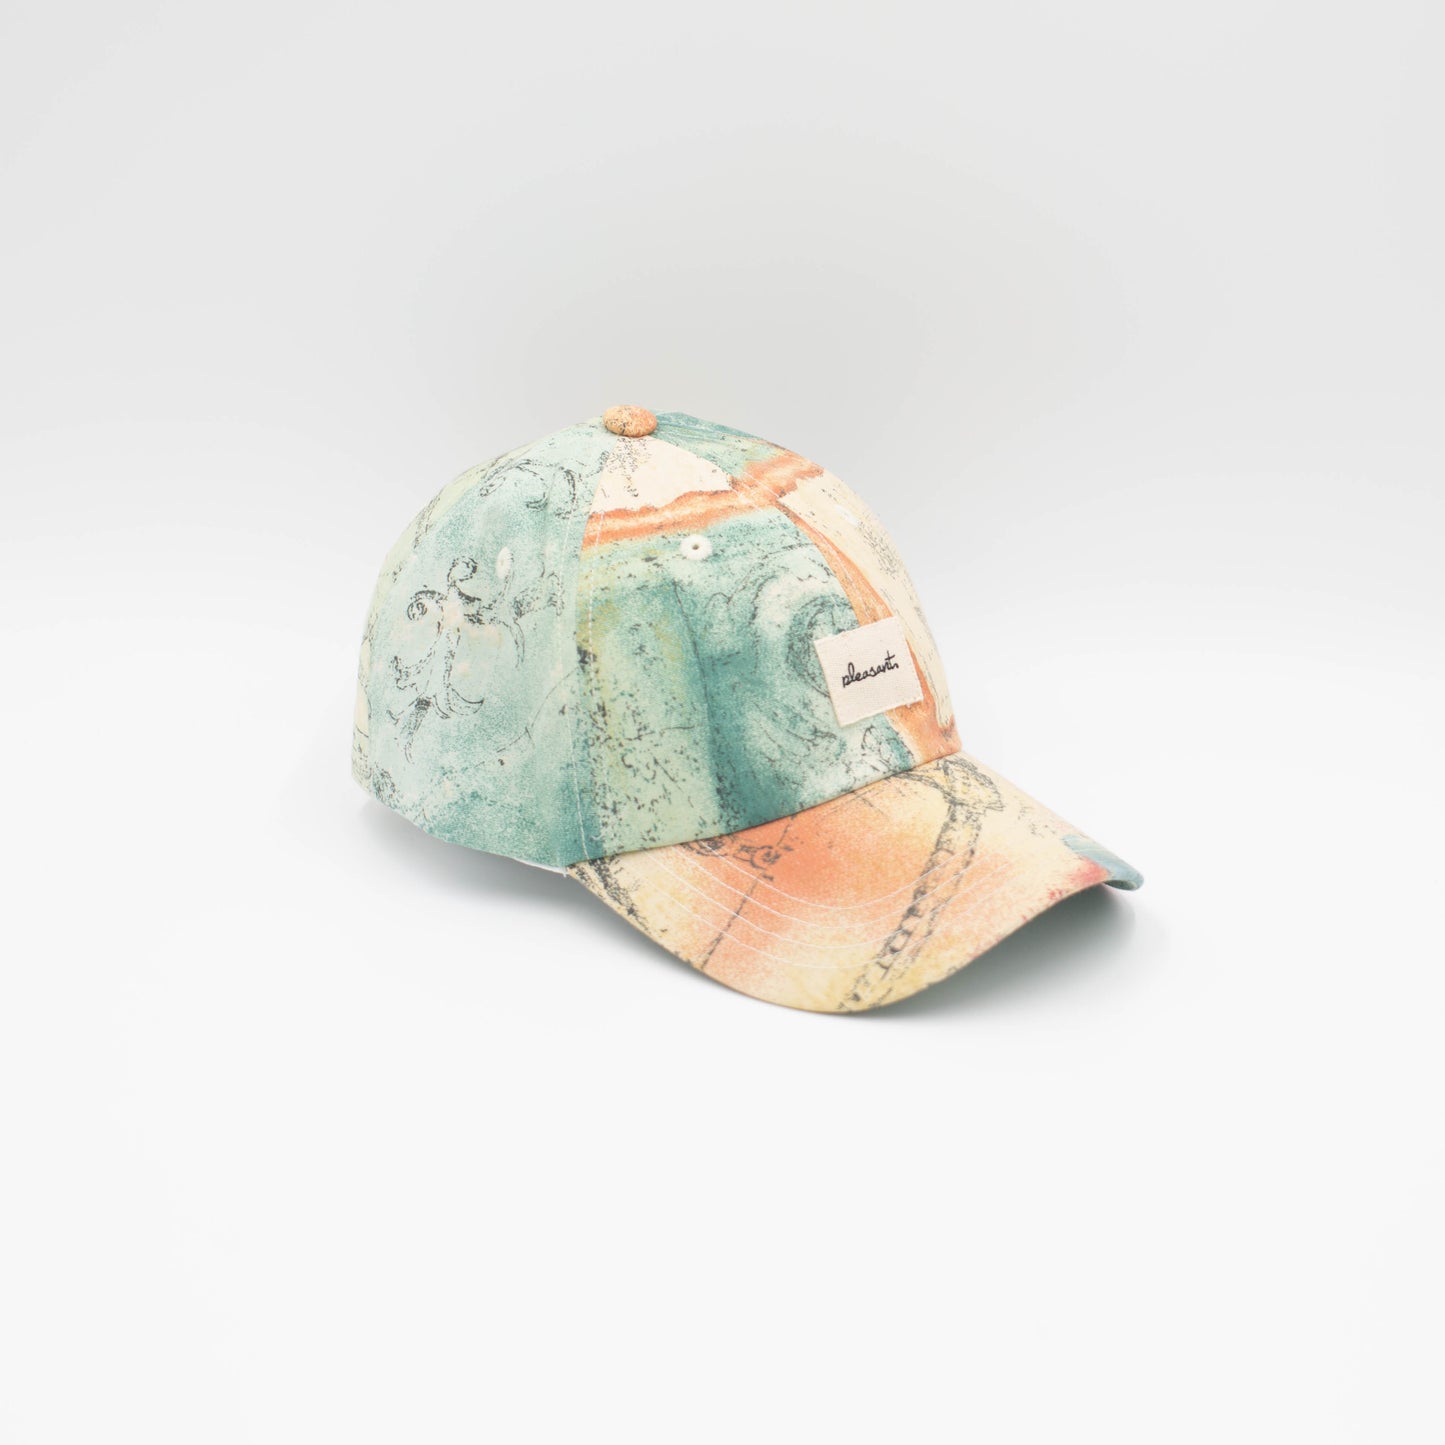 Funky marble upcycled cap